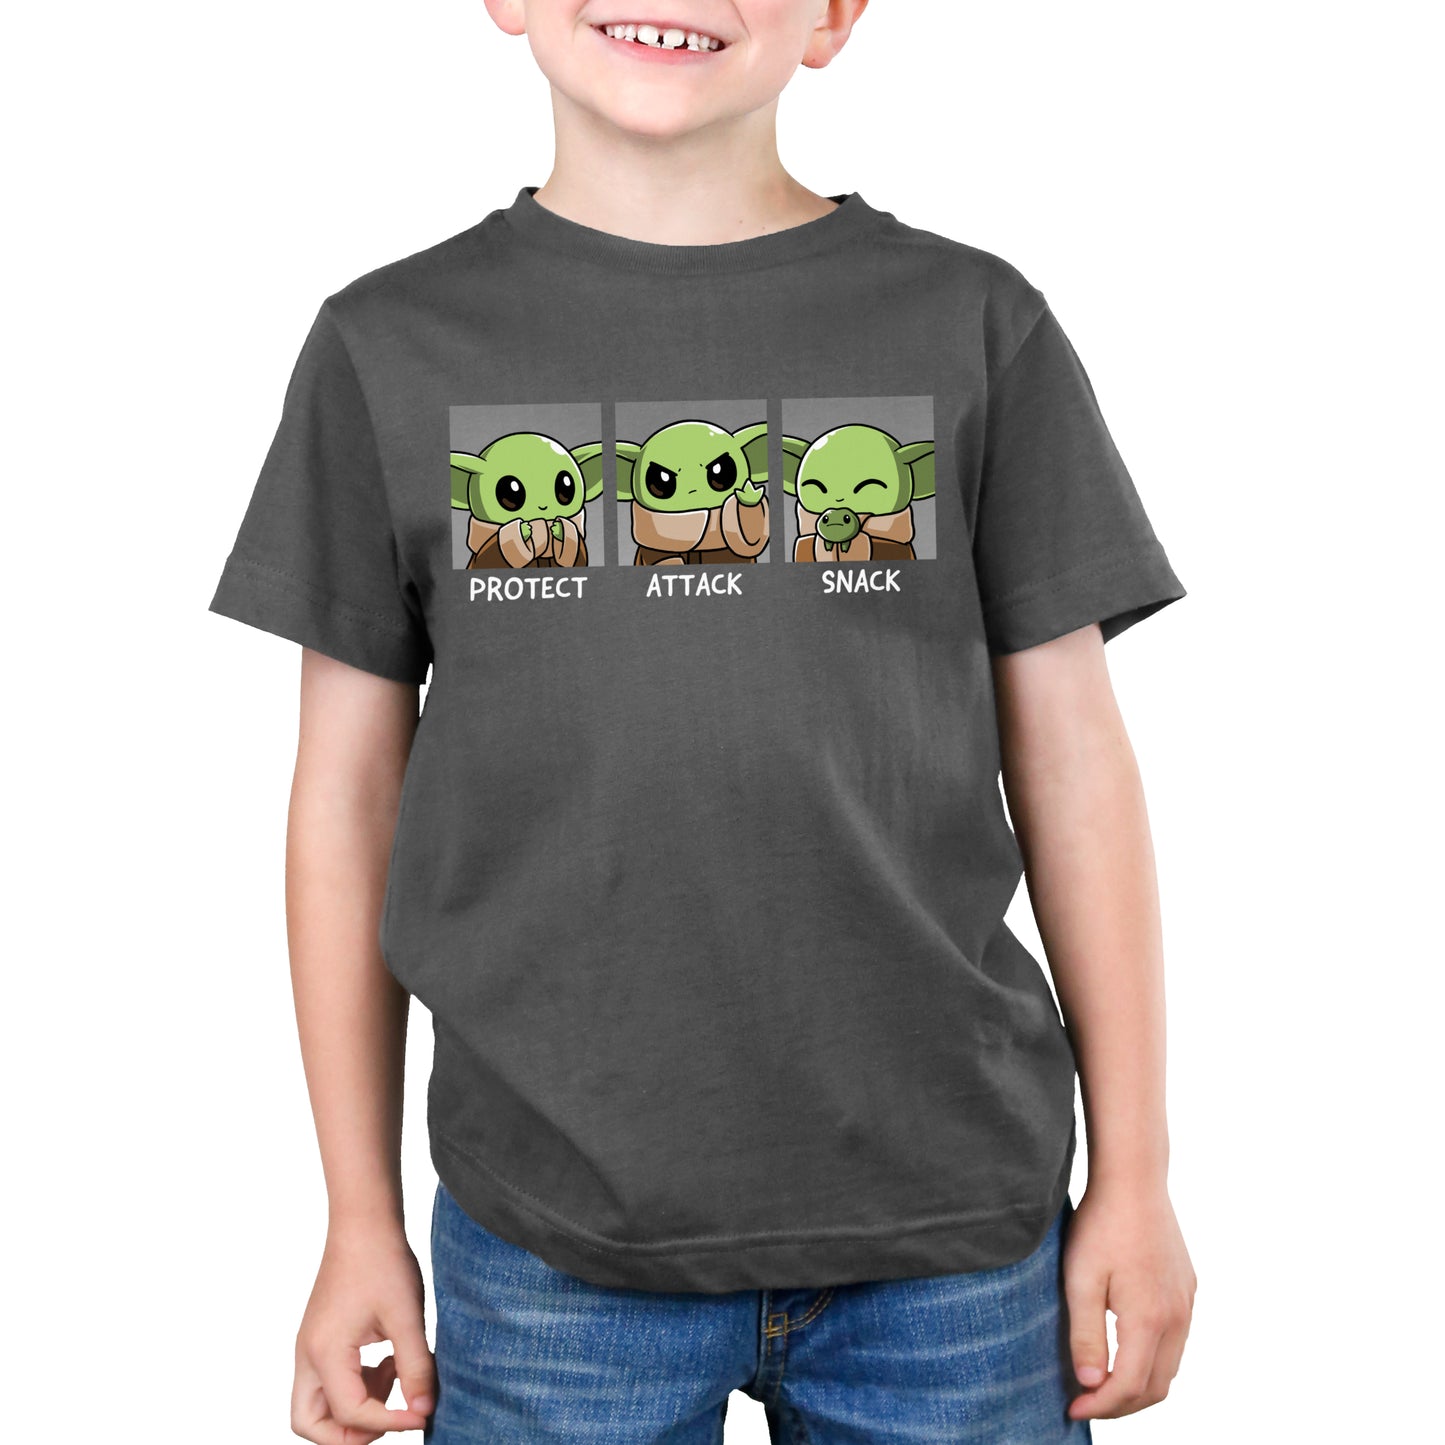 The Star Wars child yoda t-shirt is designed to Protect, Attack, and Snack.